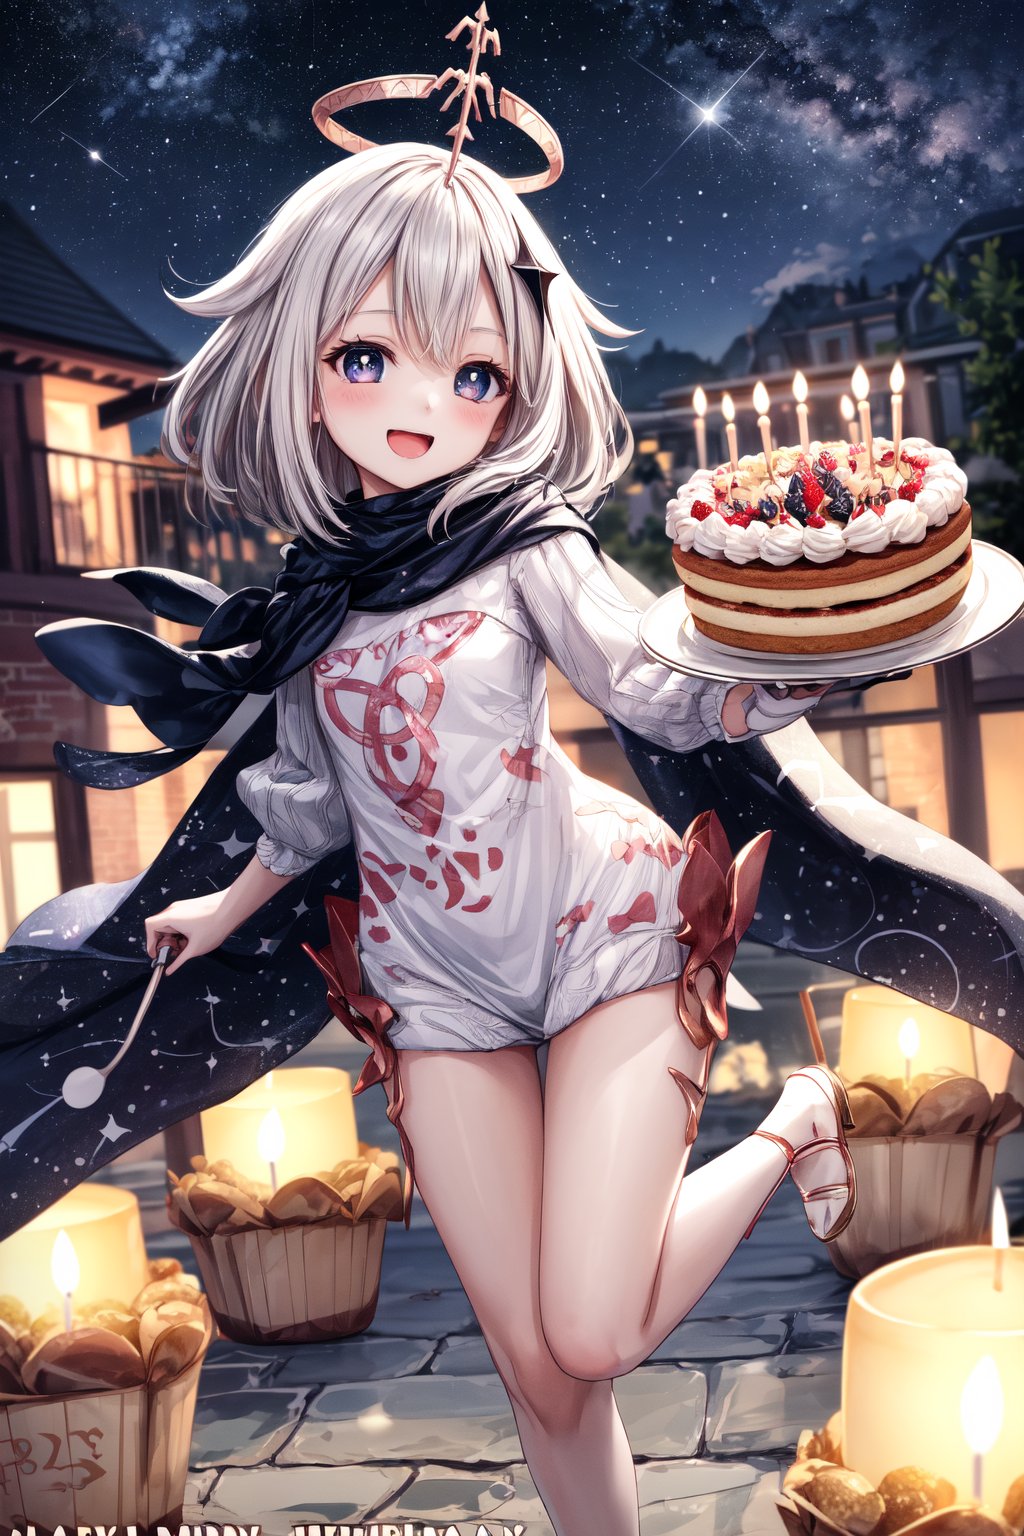 loli, full_body, small_body , ultra-detailed, masterpiece, happy birthday, masterpiece, floating in the air with an expression of pure joy on her face. The scene takes place on a starry night outdoors, where a surprise birthday party is taking place in her honor. Paimon gazes in awe and surprise at the brightly decorated cake in front of her, with flickering candles illuminating her petite figure. Her excitement is palpable in her big bright eyes and radiant smile, paimondef, fairy, floating the air, night, high detailed, high_resolution, crown,best quality